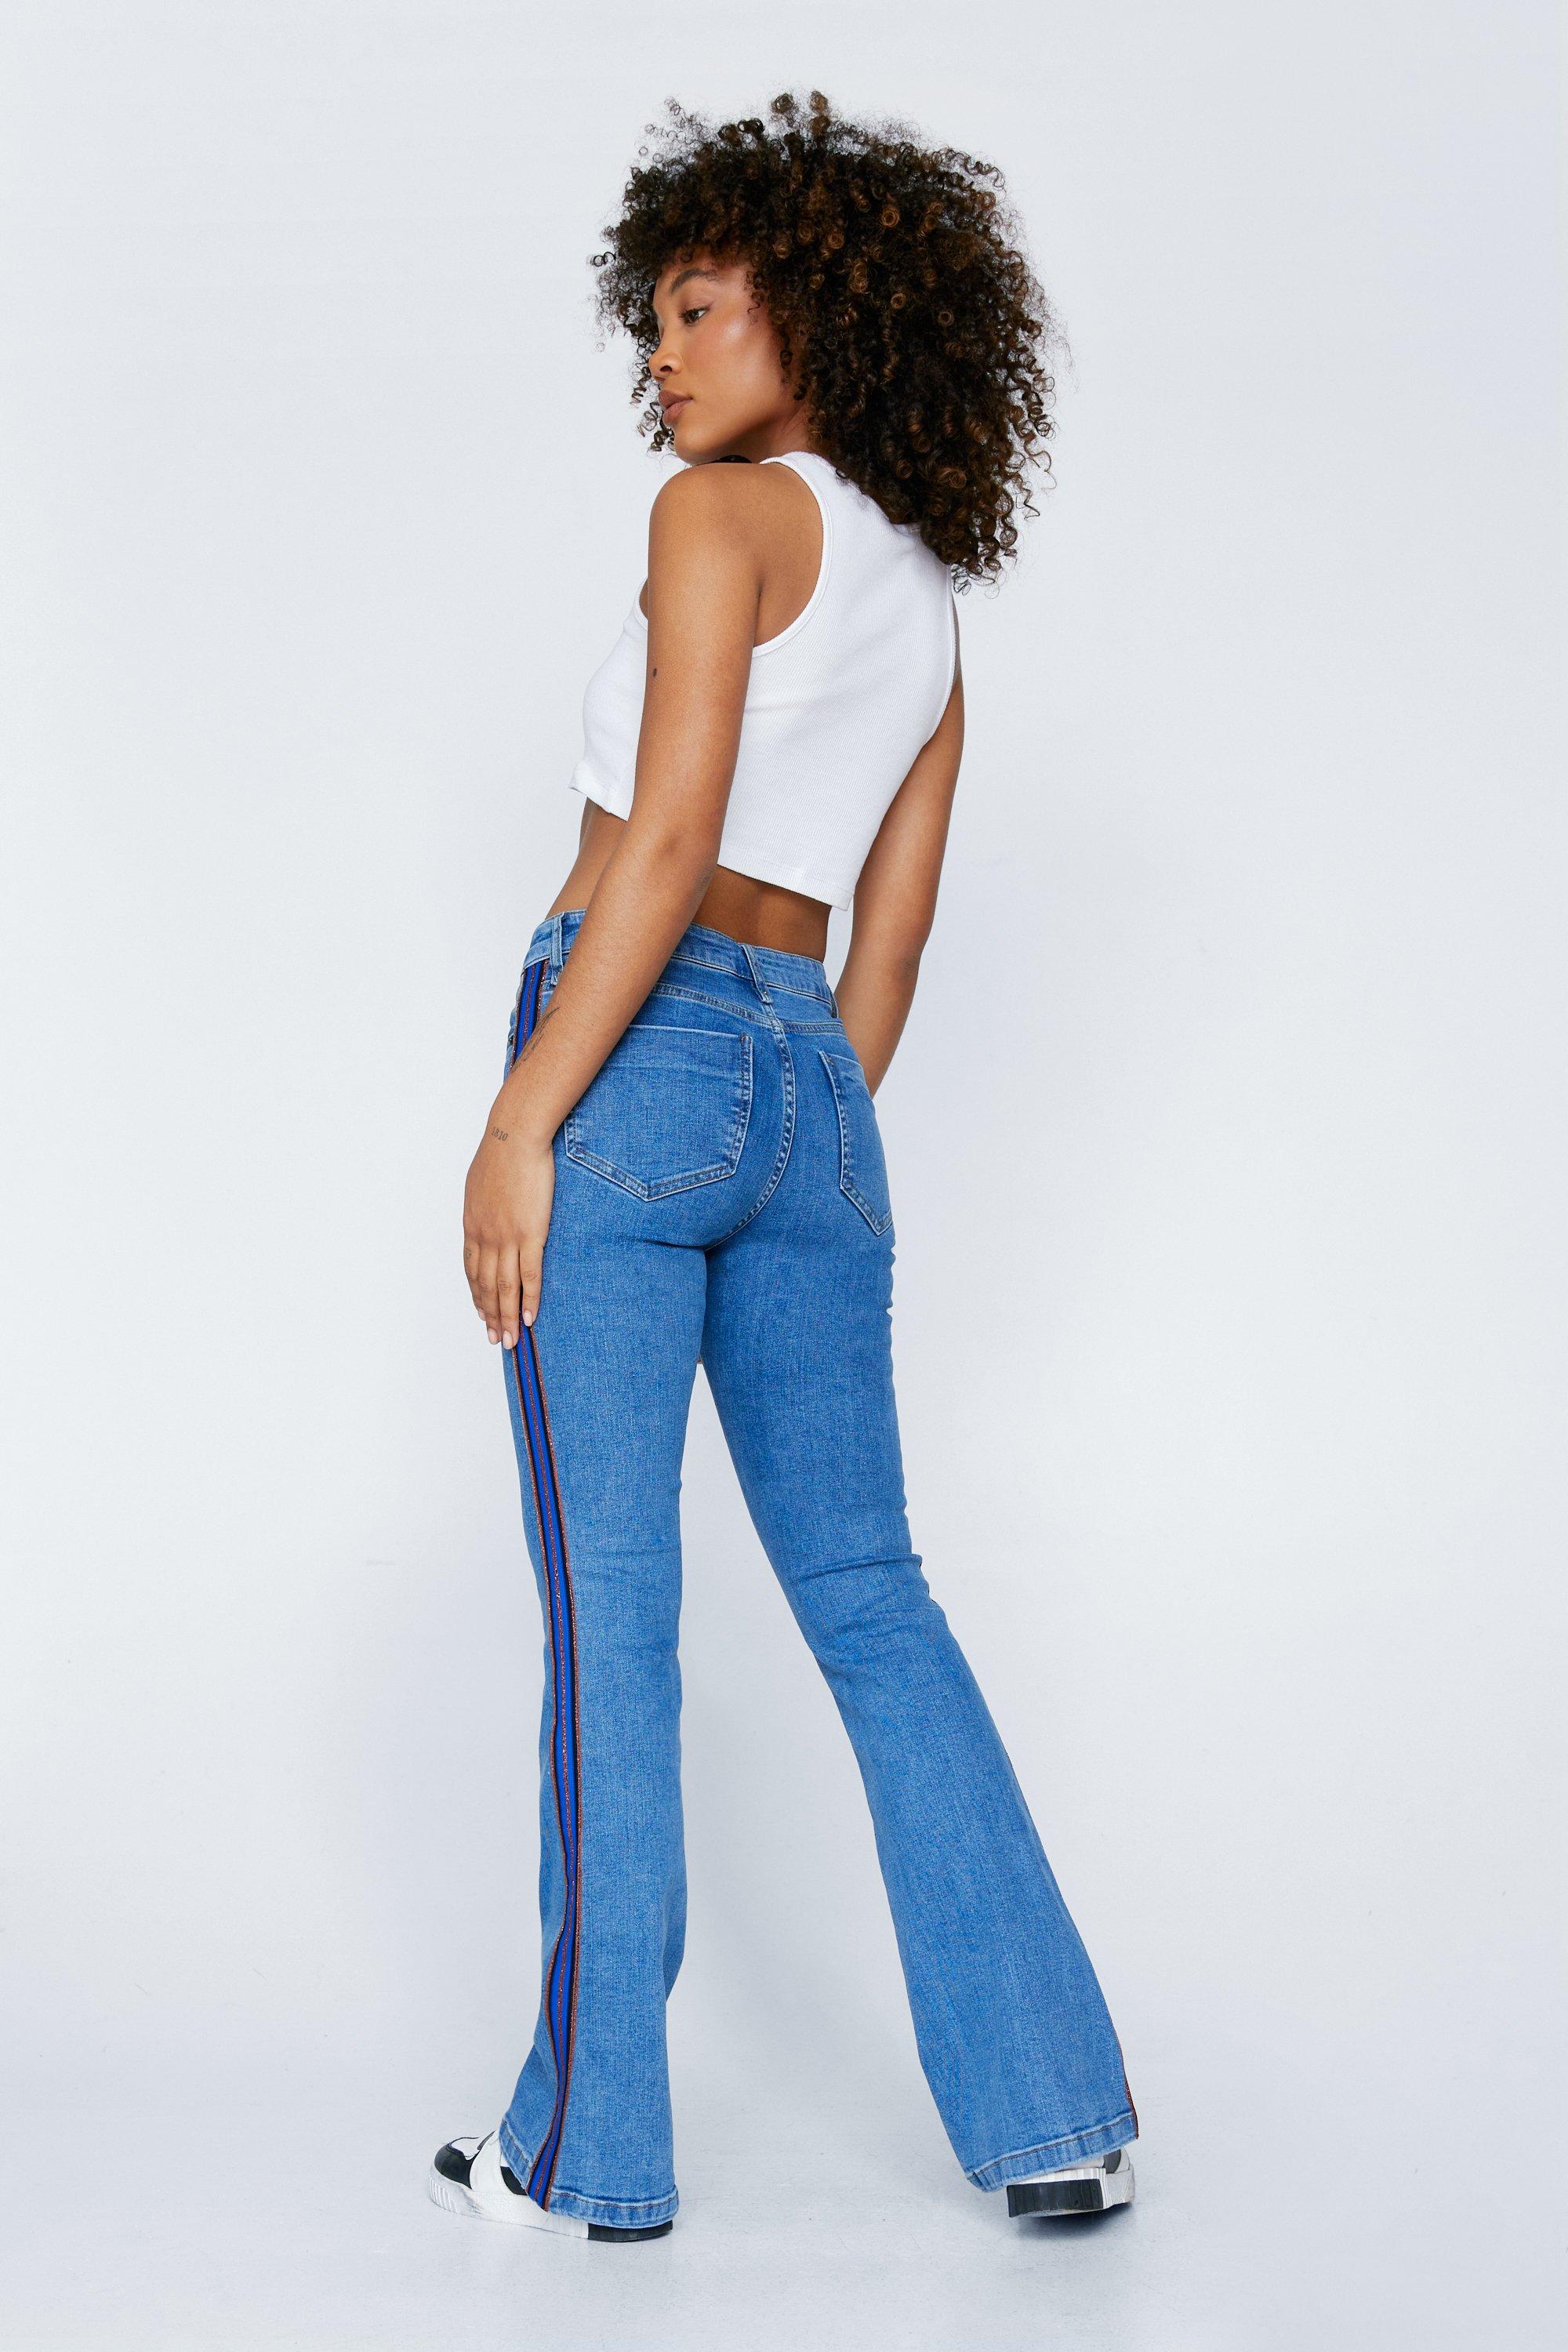 Flare Pants  Wide Leg Flare Pants, Flares in Jeans & Bottoms